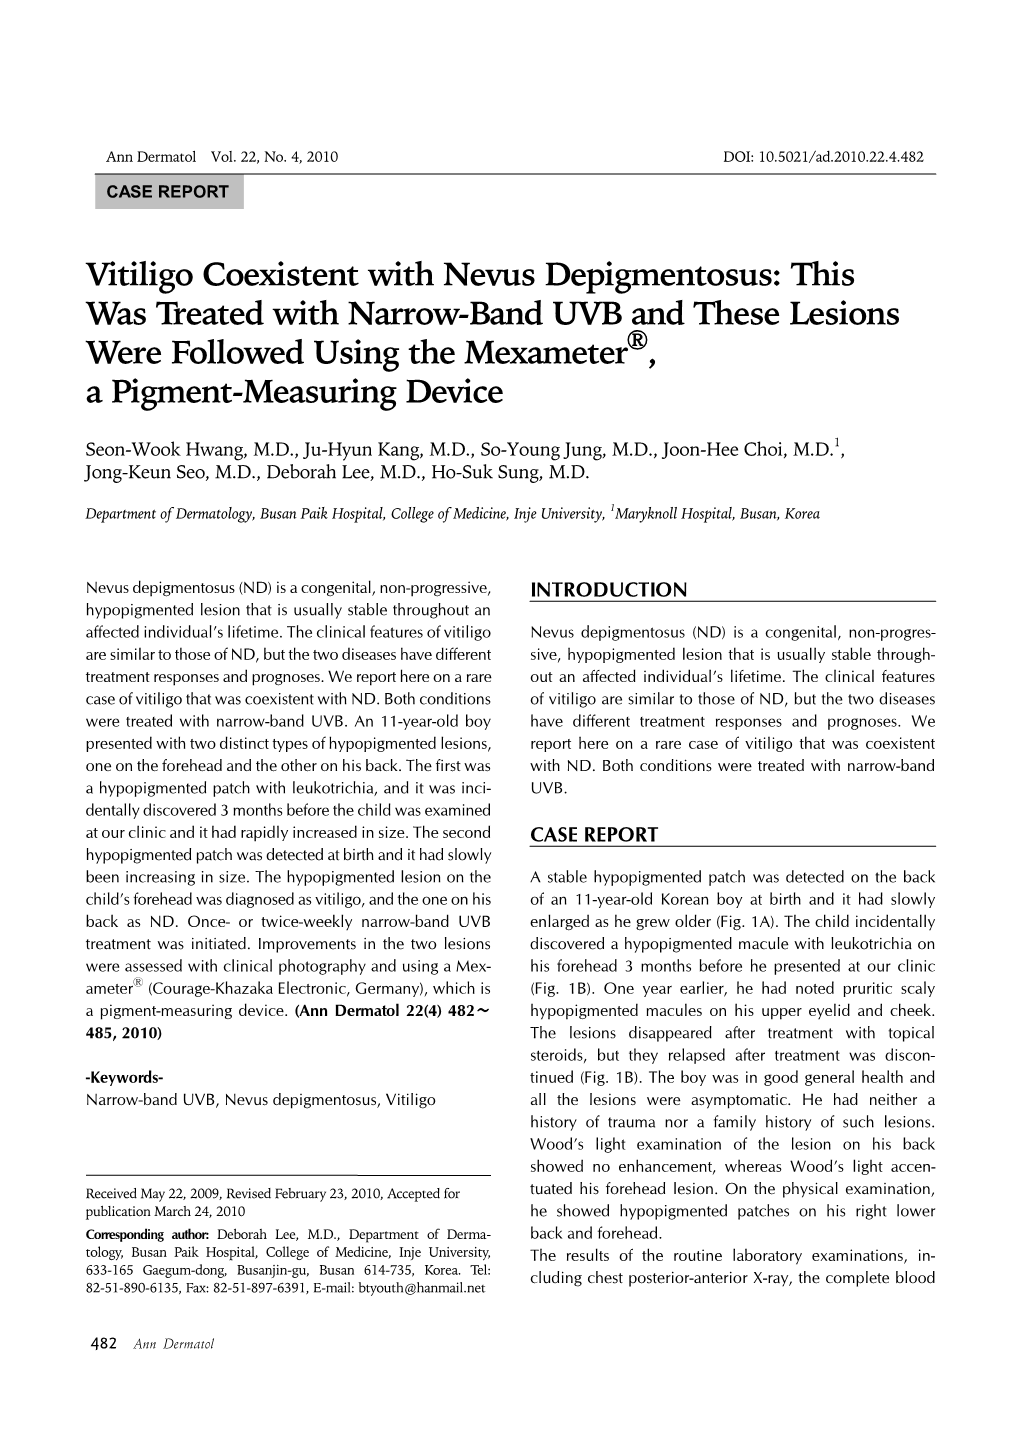 Vitiligo Coexistent with Nevus Depigmentosus: This Was Treated with Narrow-Band UVB and These Lesions Were Followed Using the MexameterⓇ, a Pigment-Measuring Device